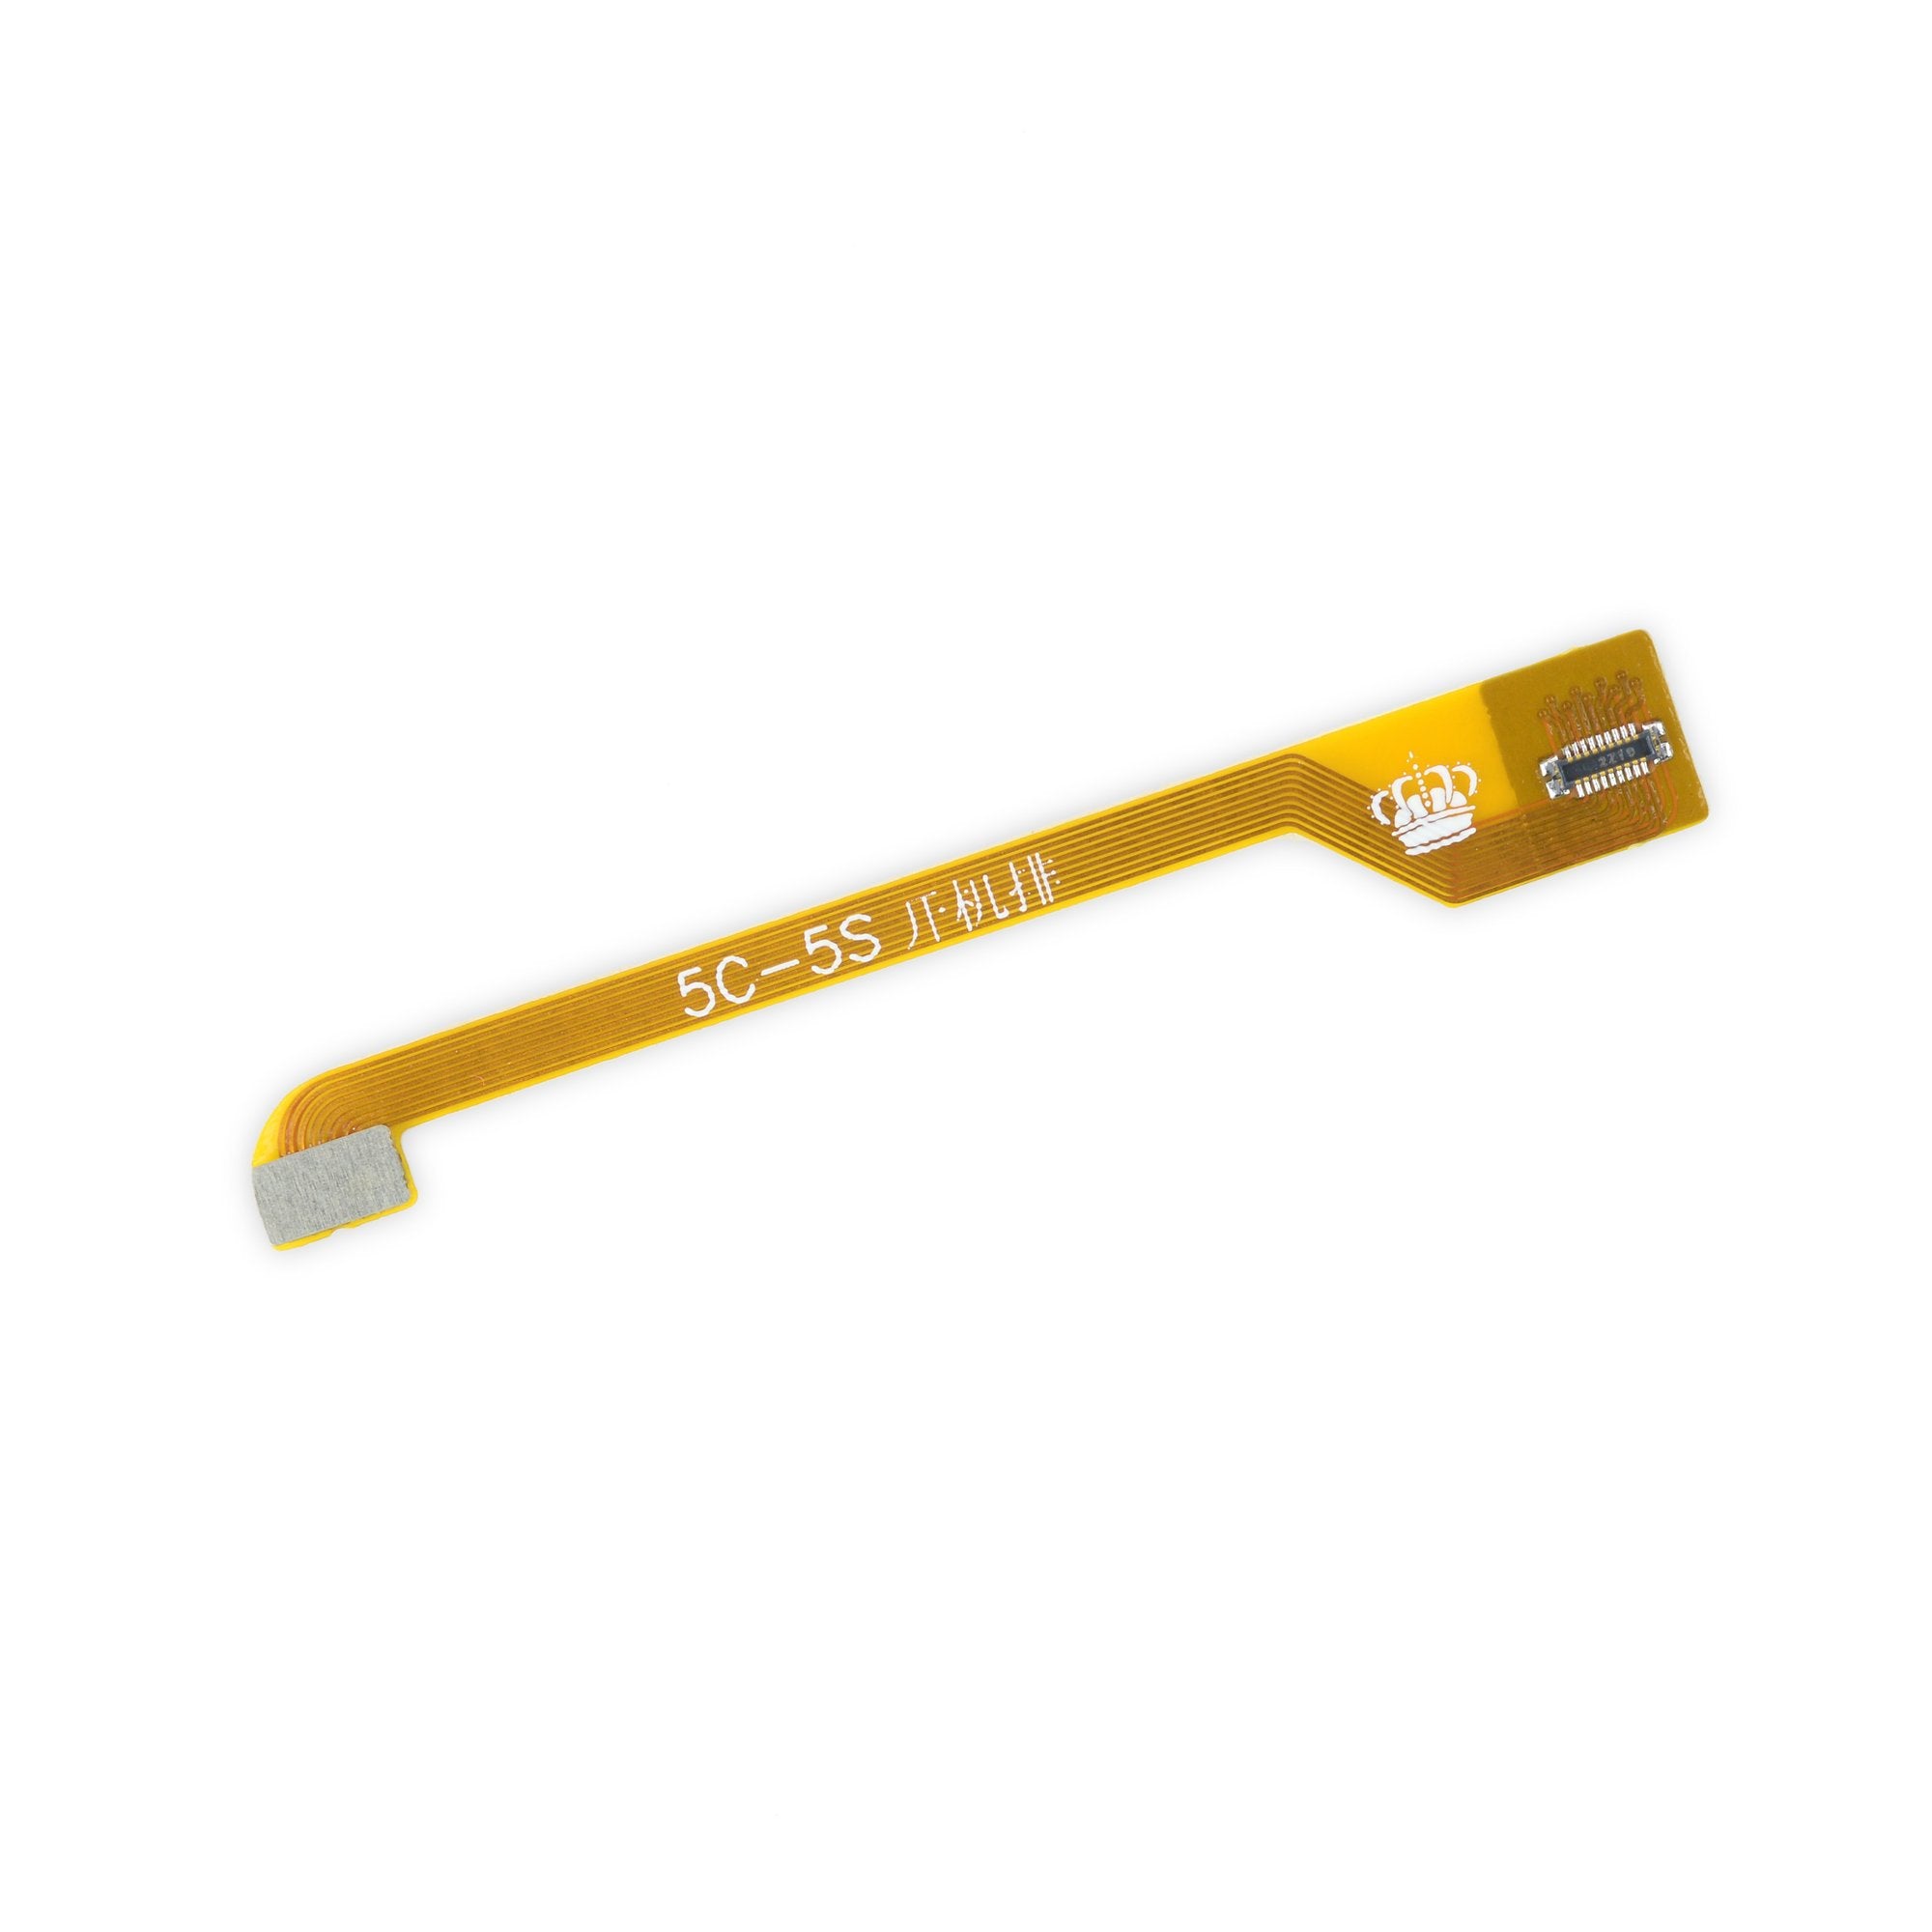 iPhone 5s/5c Test Cable for Power Button